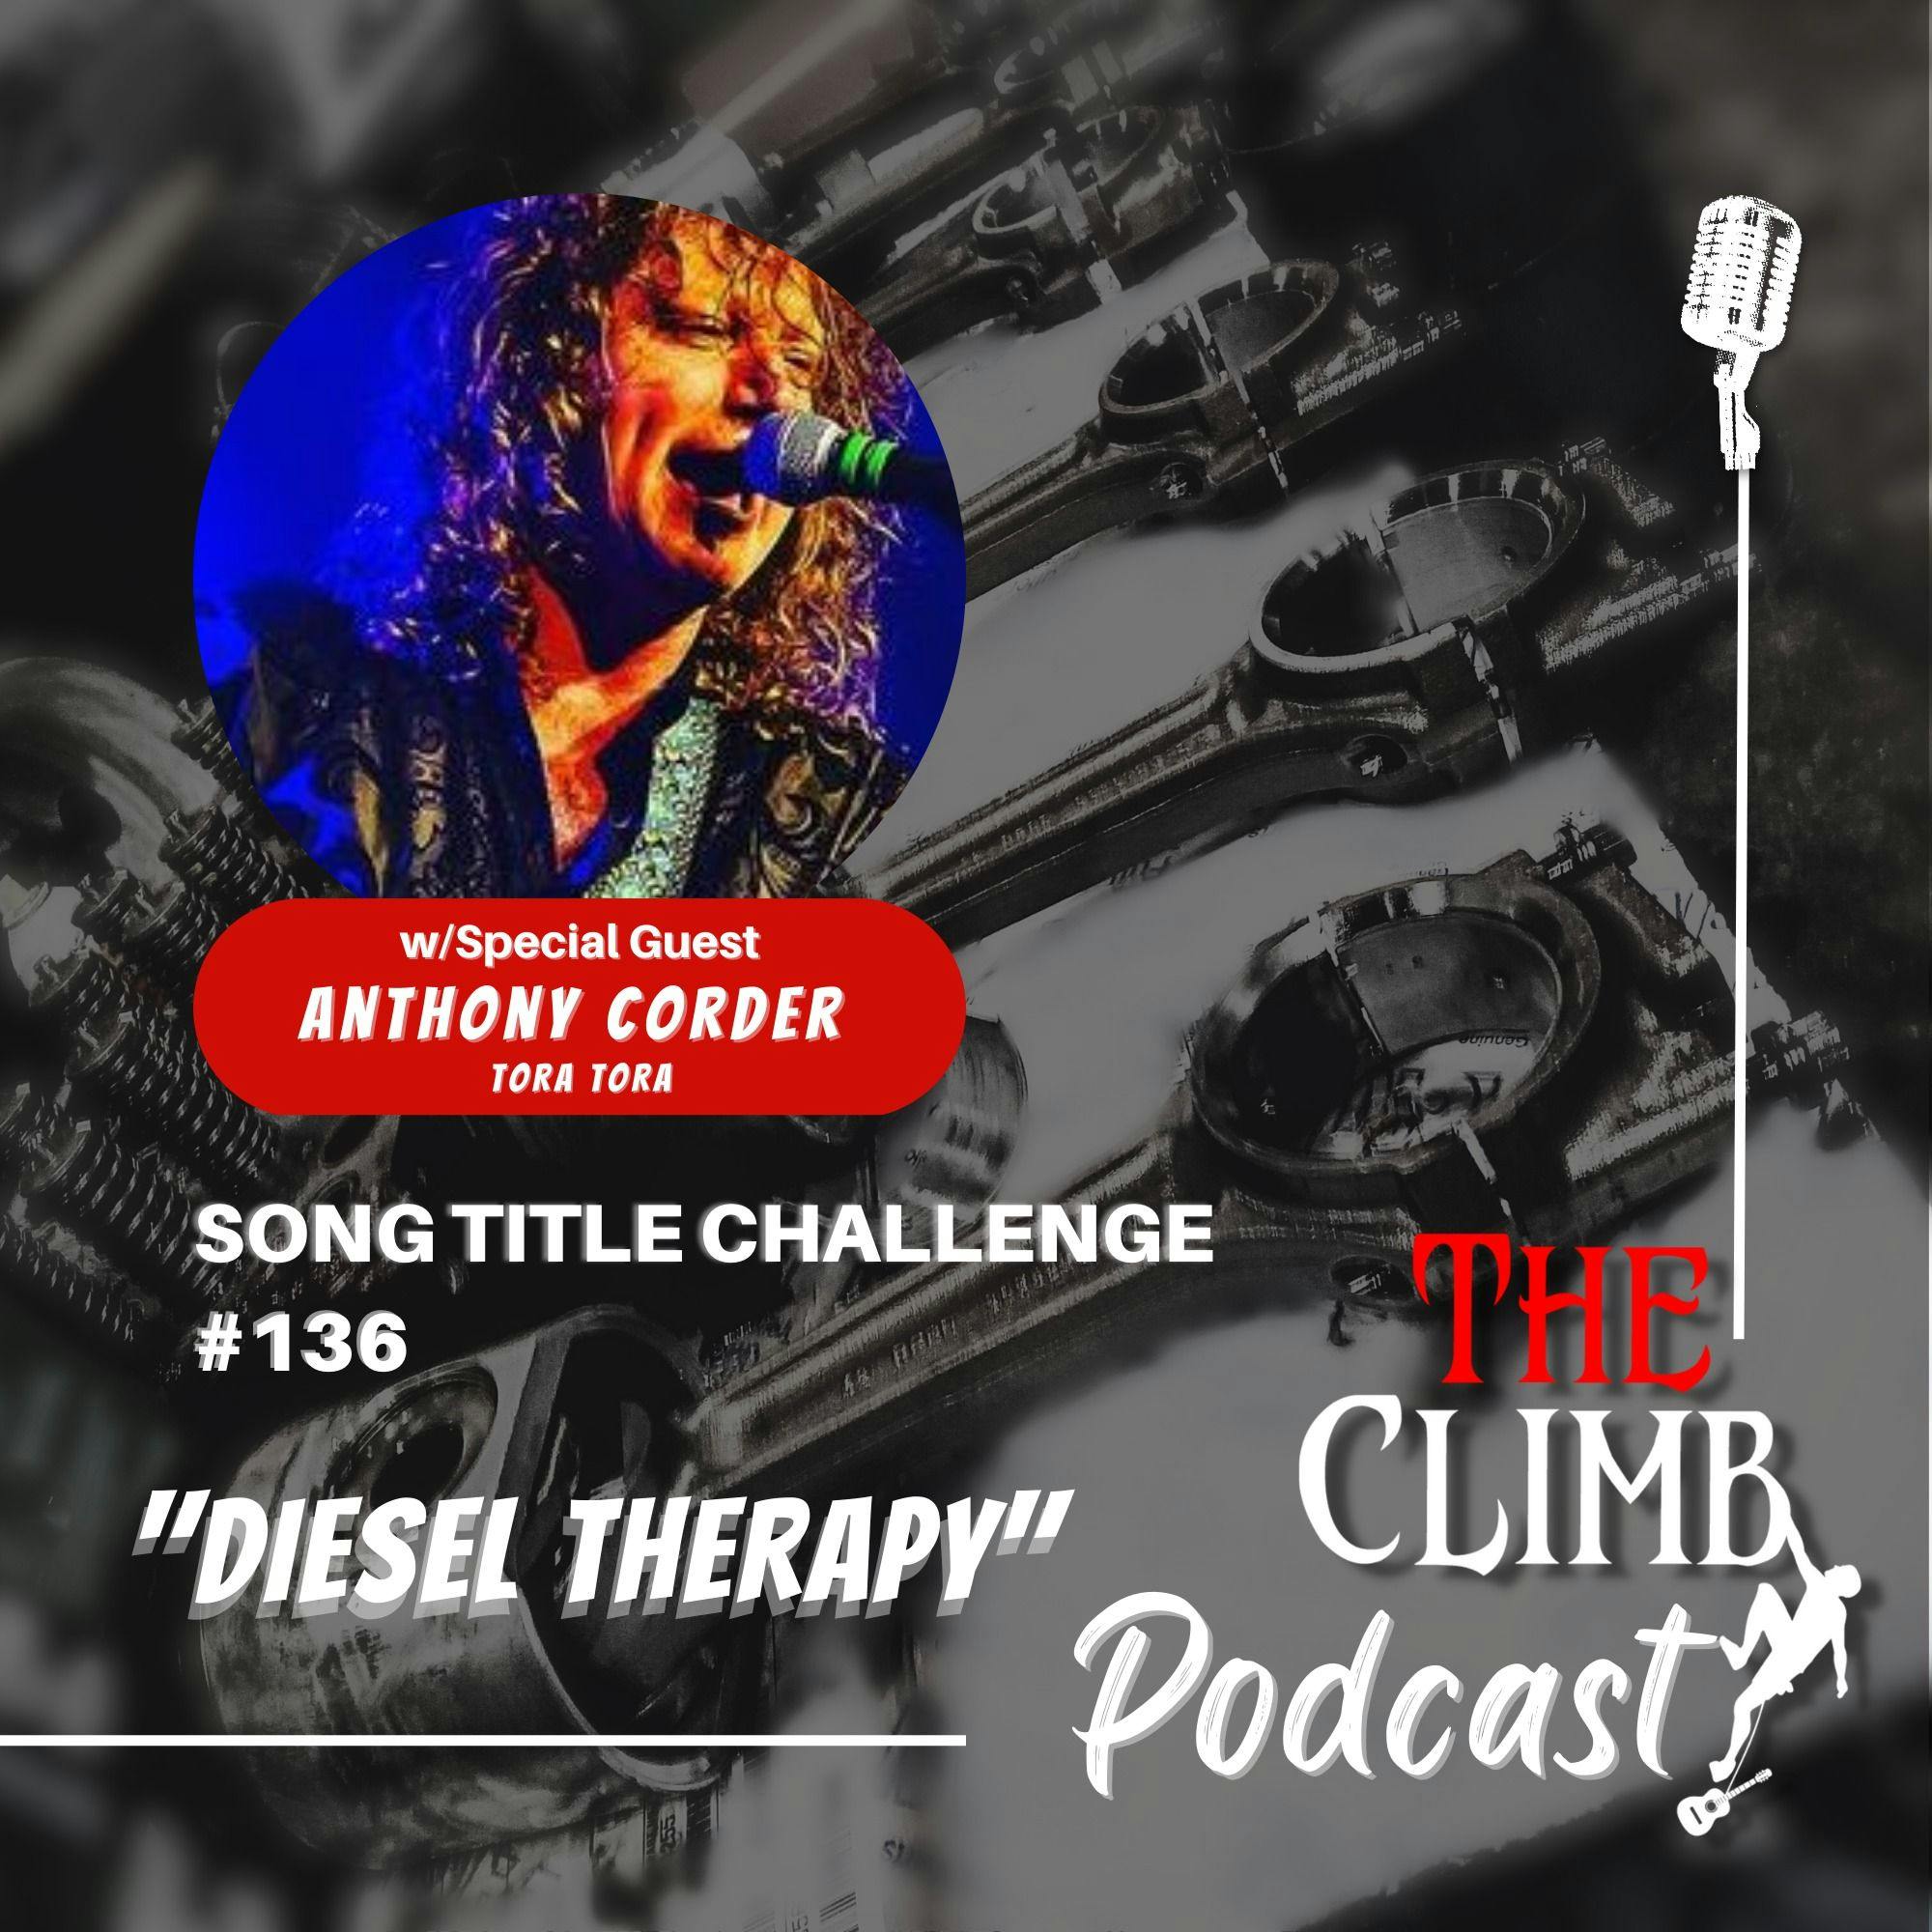 Song Title Challenge #136: ”Diesel Therapy” w/ Anthony Corder